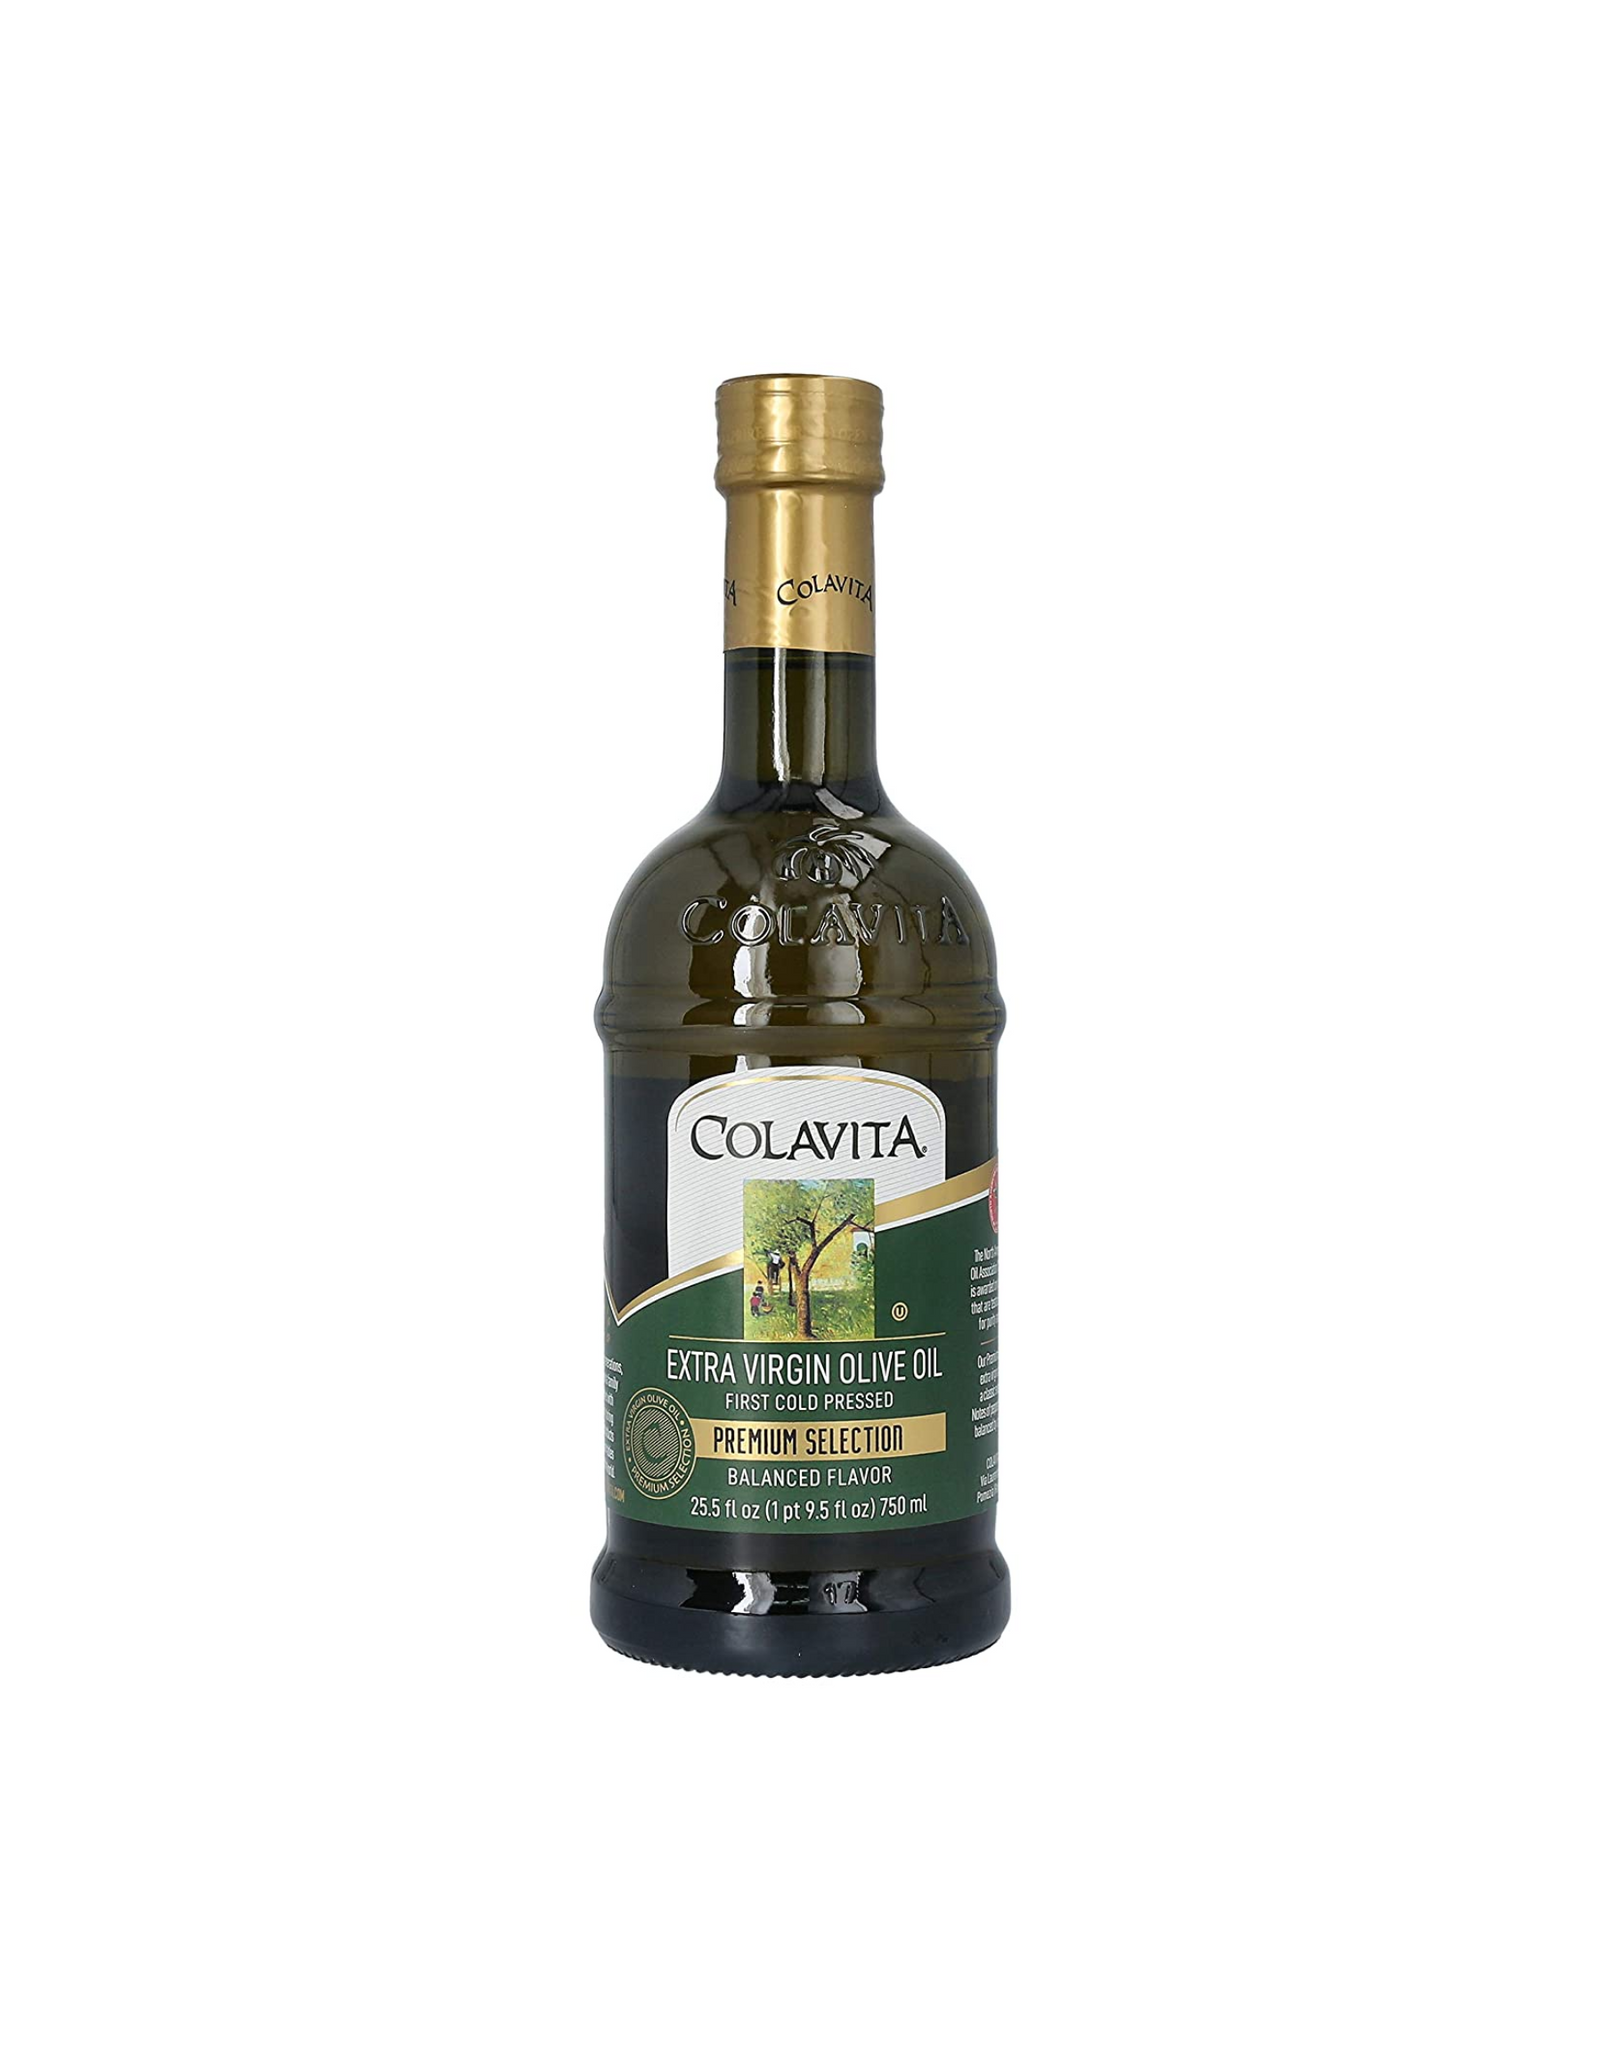 Colavita Extra Virgin Olive Oil, First Cold Pressed, Premium Selection, 25.5 Fl Oz (Pack of 1)